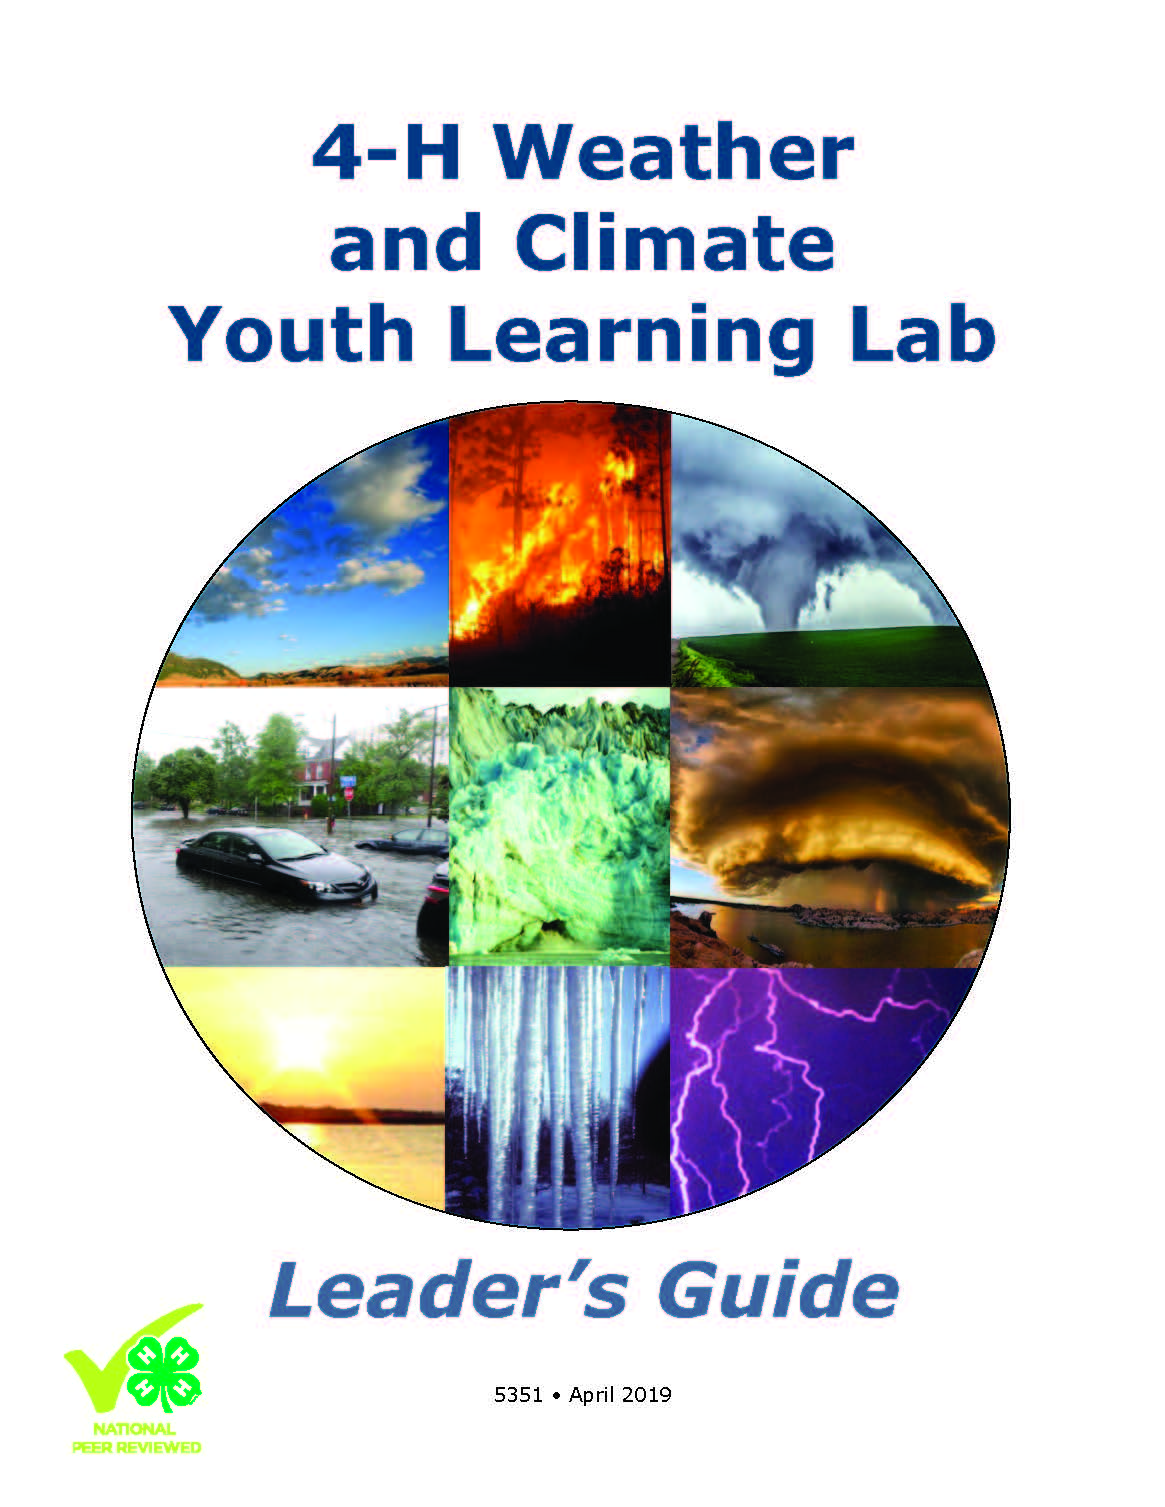 Youth Climate Curriculum